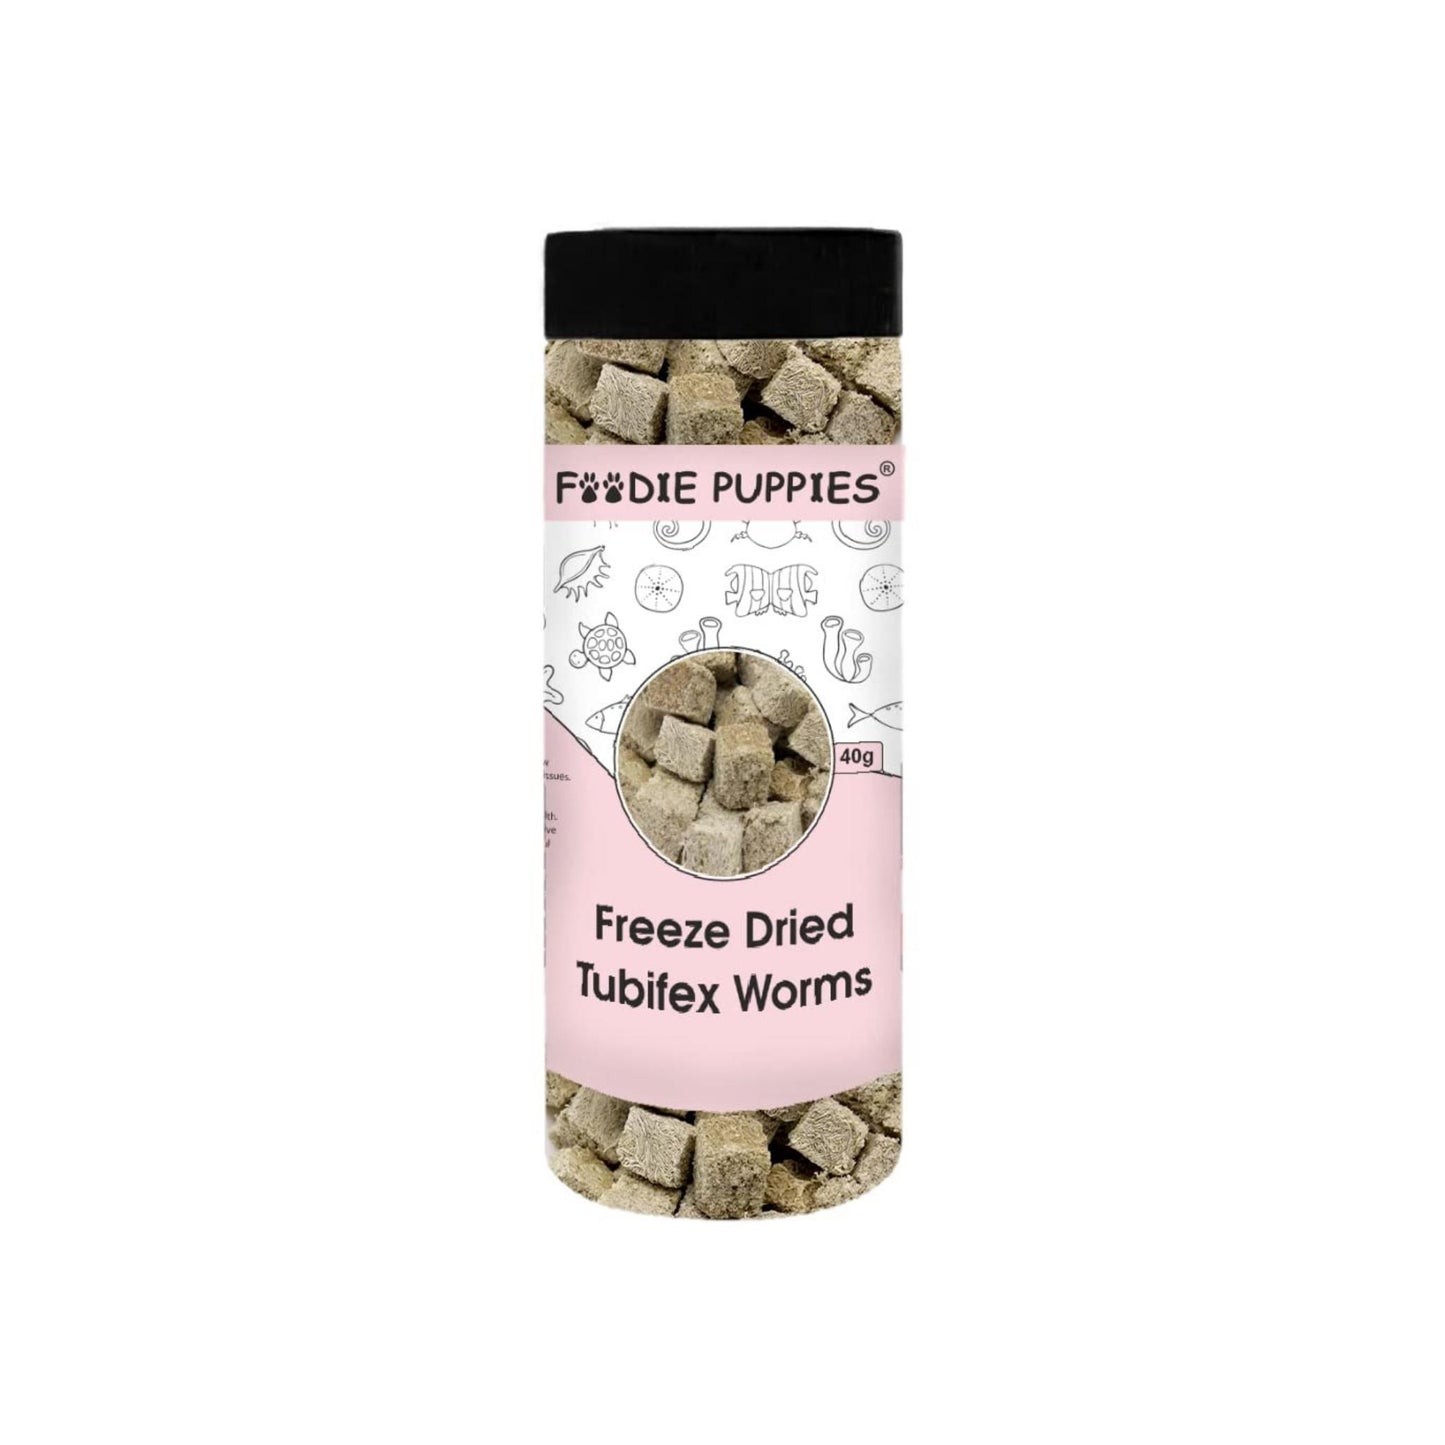 Foodie Puppies Freeze Dried Tubifex Worms Fish Food - 40gm